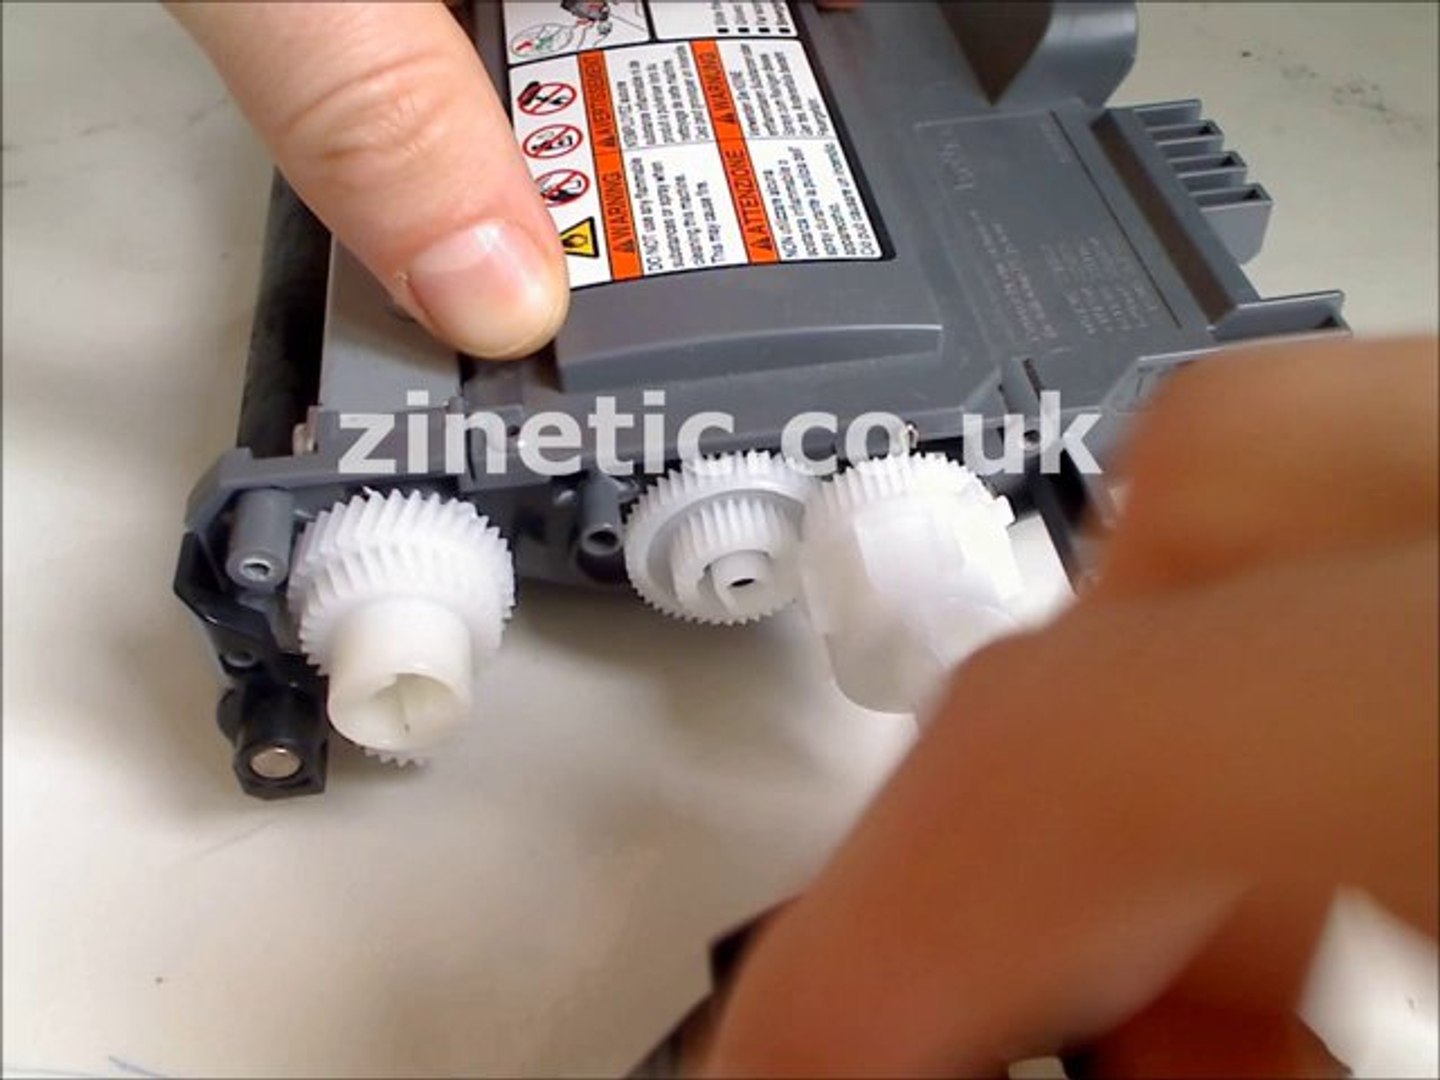 refill and reset Brother HL 2270dw toner cartridge - video Dailymotion